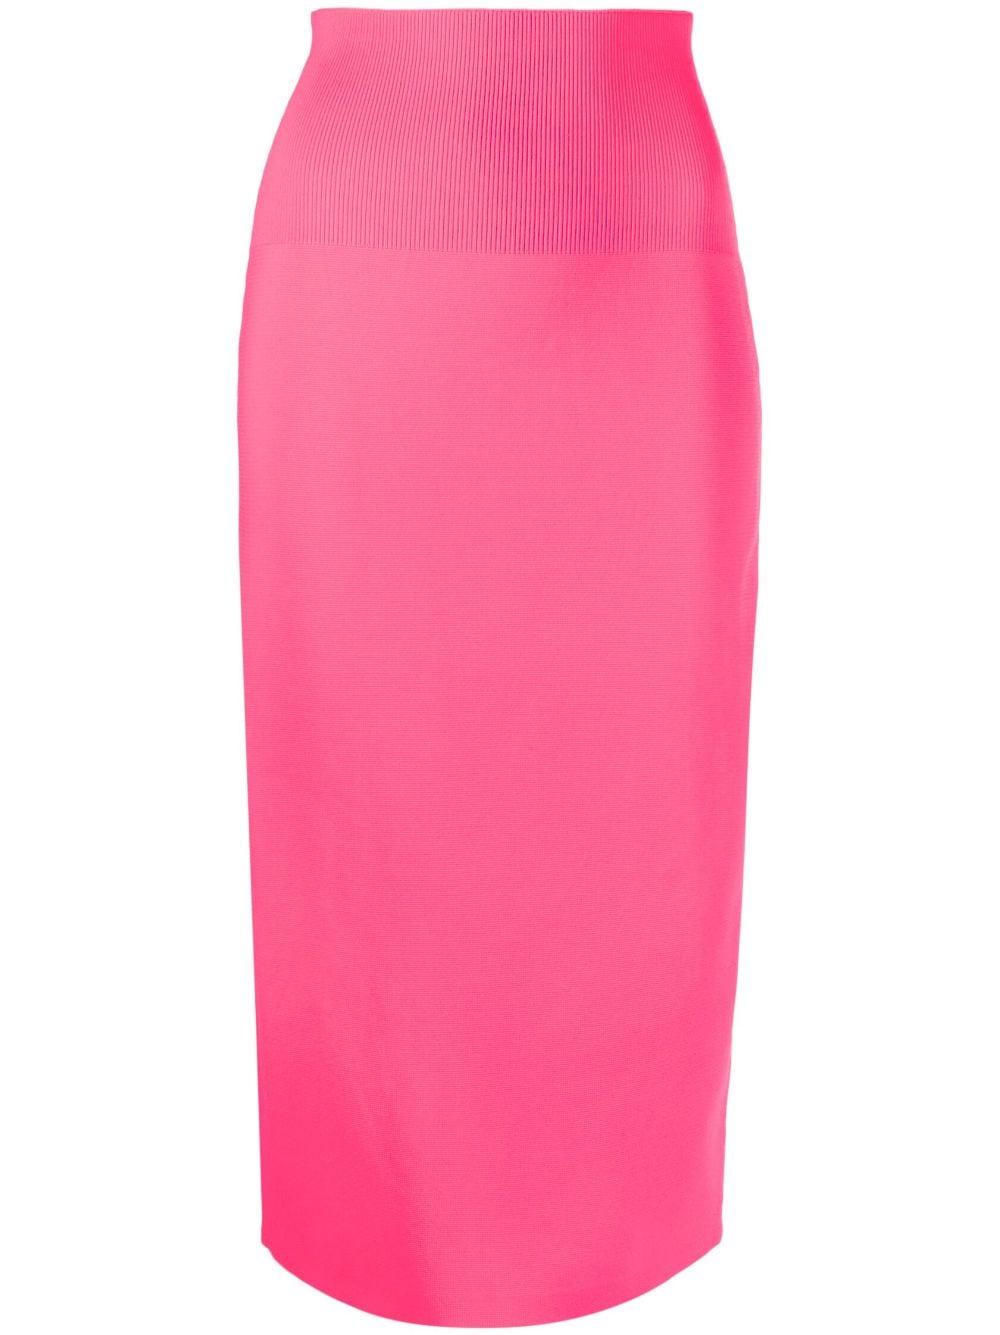 Victoria Beckham Vb Body Knitted Pencil Skirt in Pink | Lyst